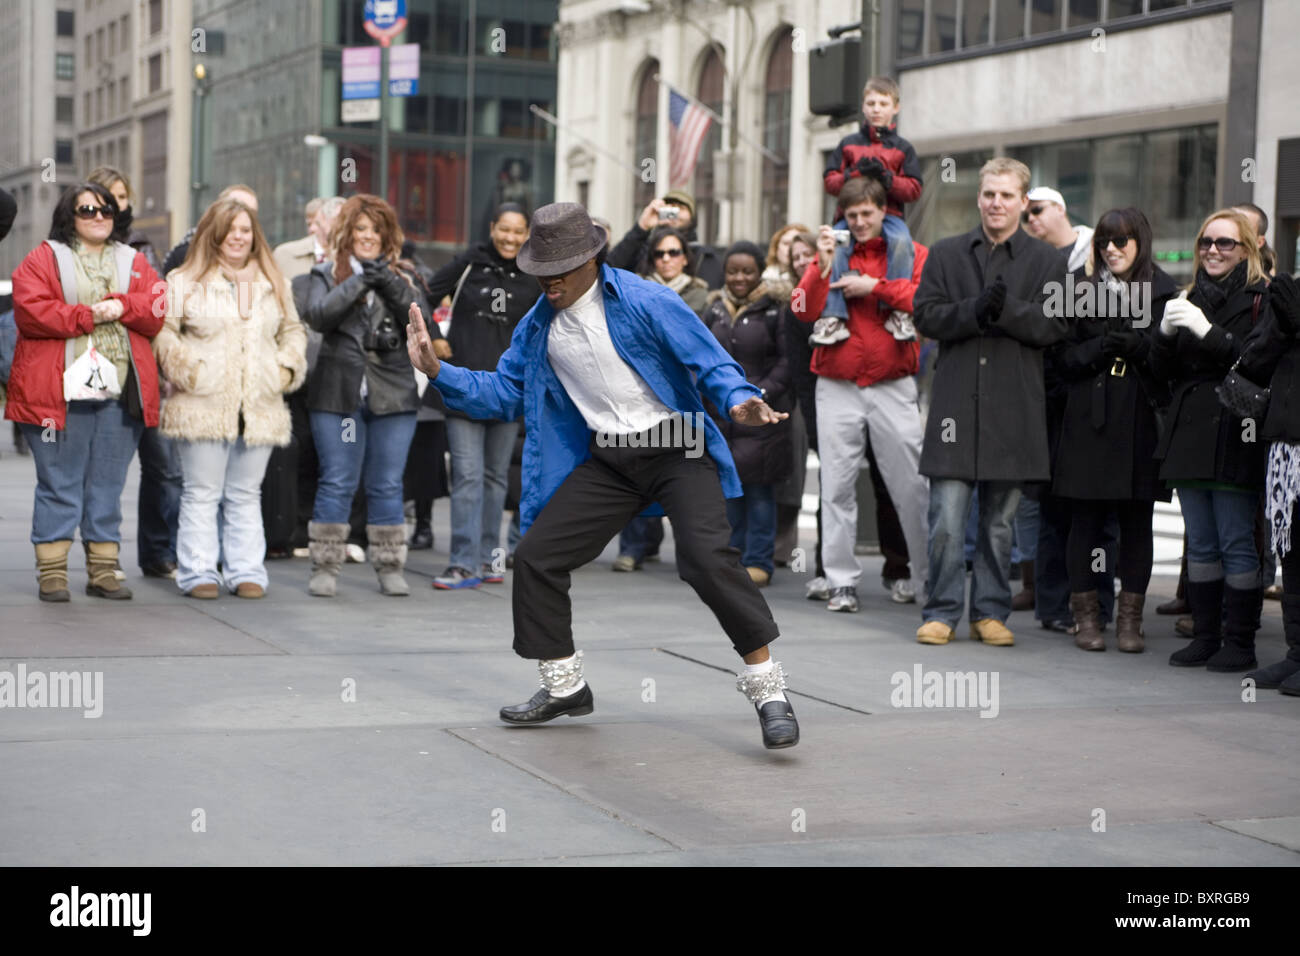 Break Dancers entertain the crowds by the NY Public Library on 5th Ave. during the holidays in NYC. Michael Jackson impersonator Stock Photo